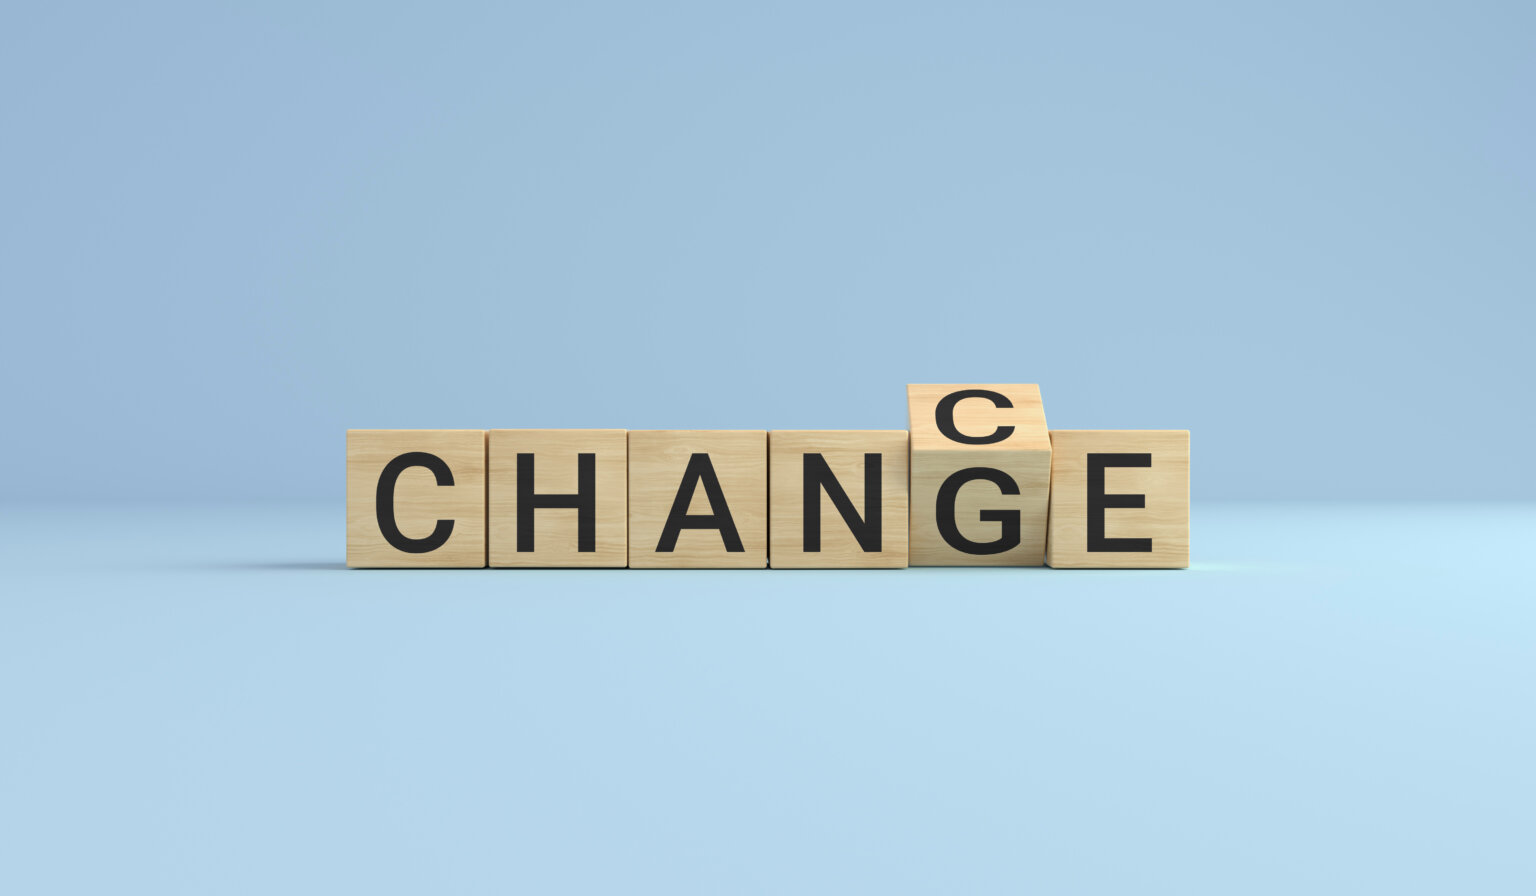 Text with each letter as a block showing 2 different words being "change" and "chance" representing that businesses have opportunities with a good model for managing complex change and handling change management